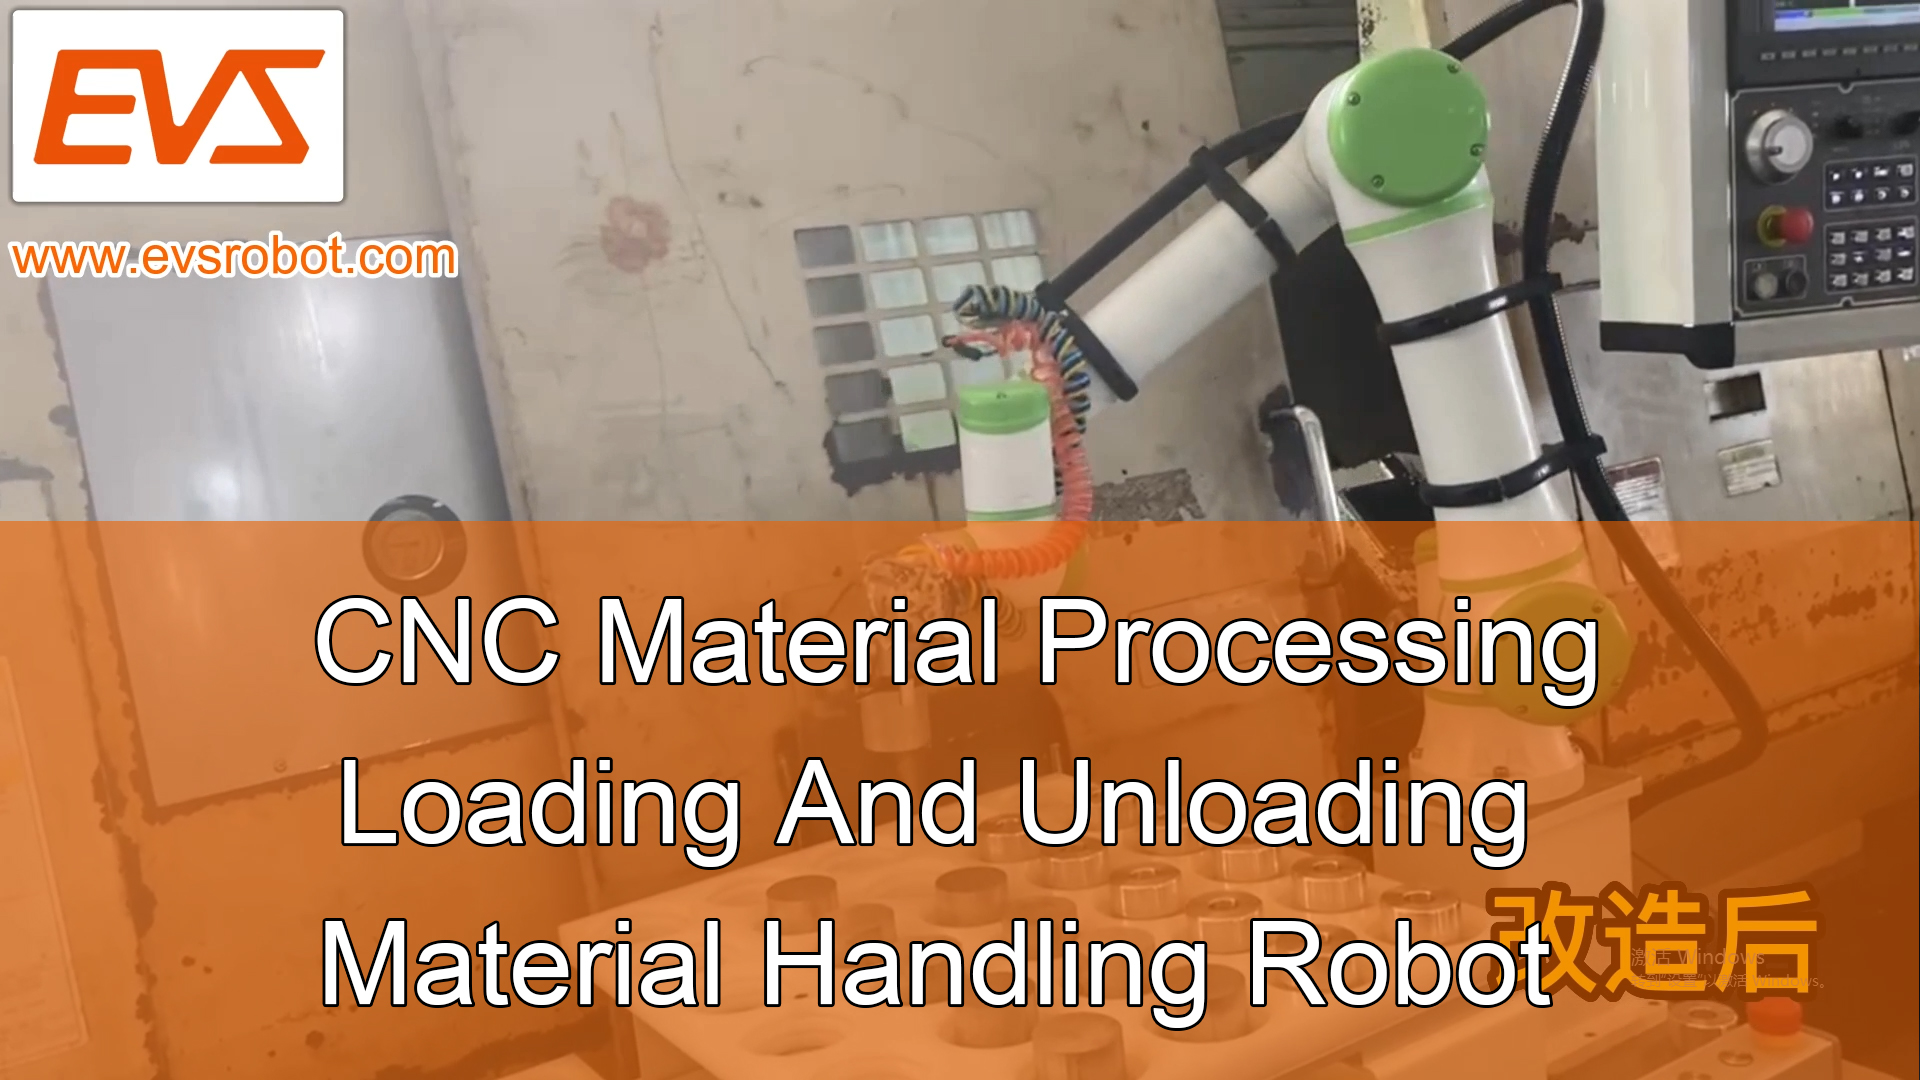 CNC Material Processing | Loading And Unloading | Material Handling Robot